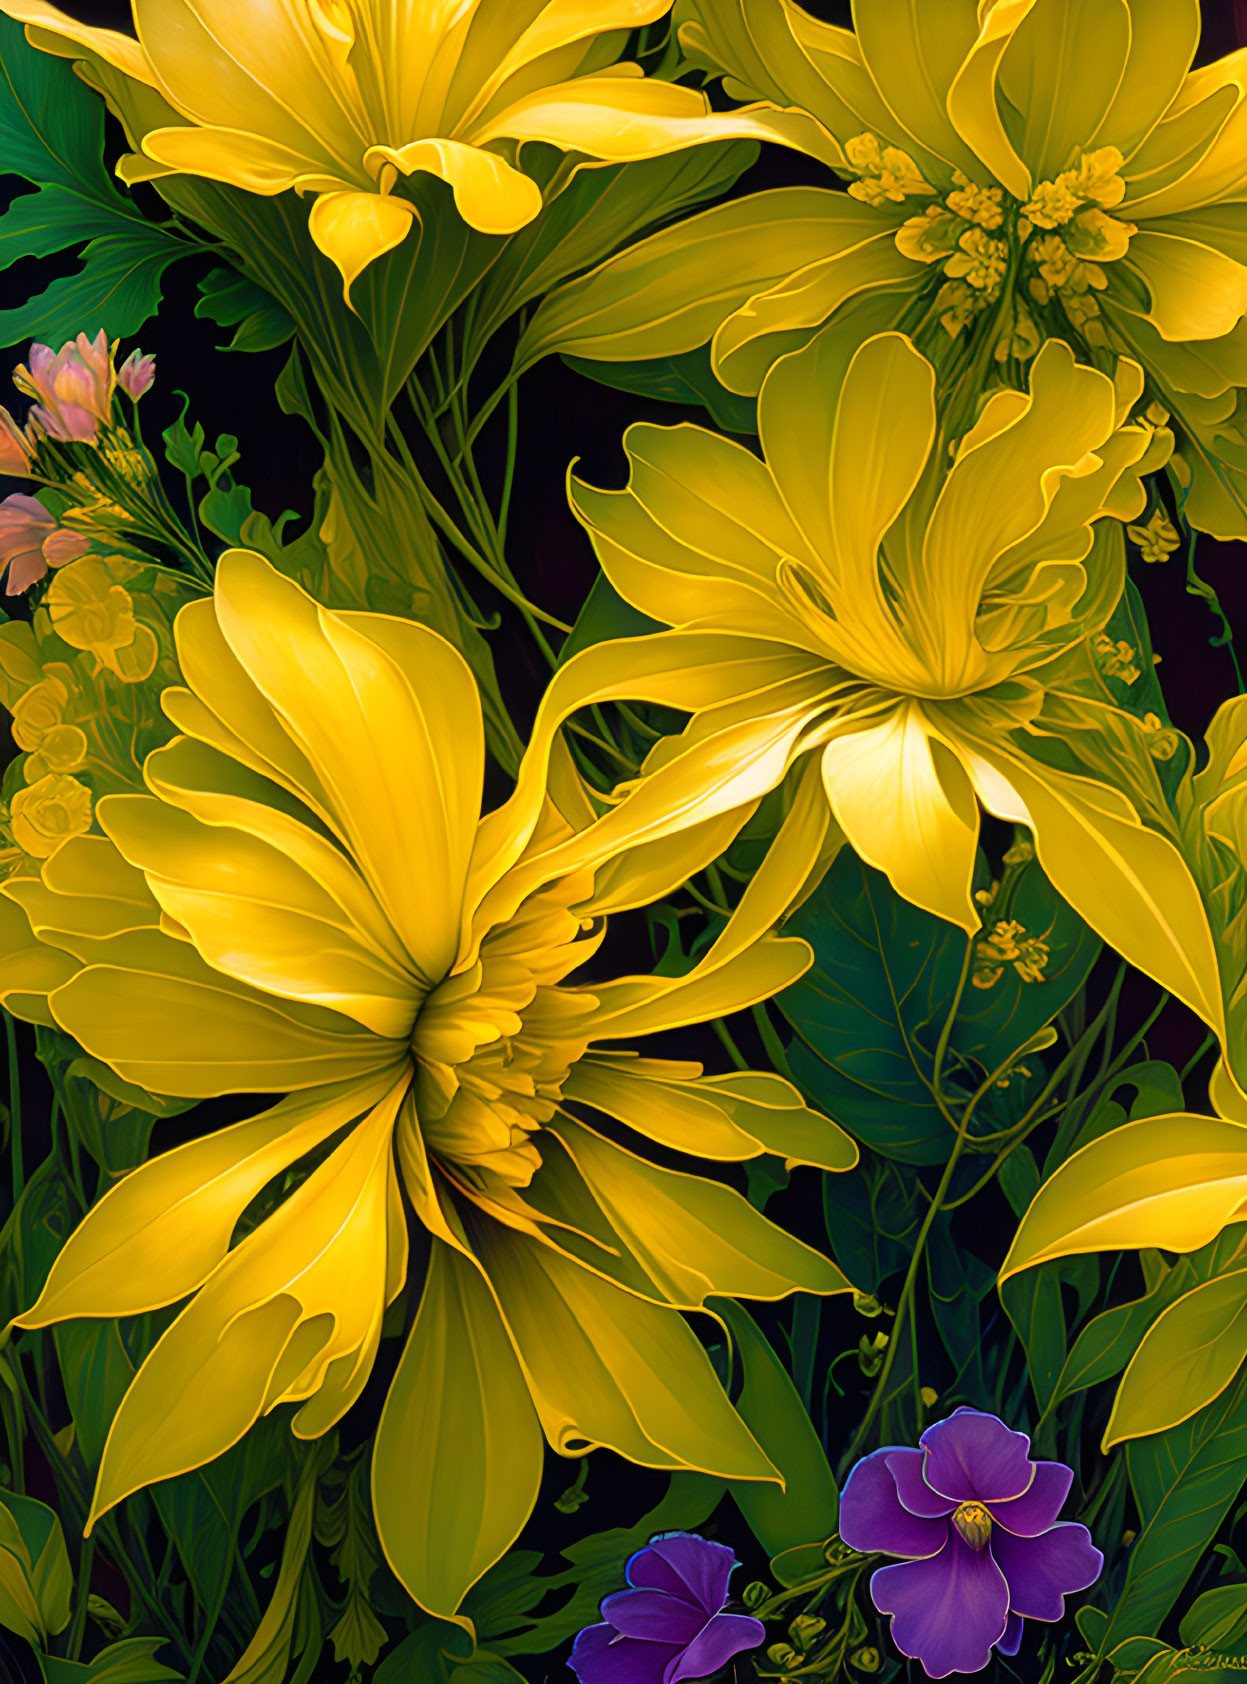 Colorful digital artwork: yellow and purple flowers with green leaves on dark background